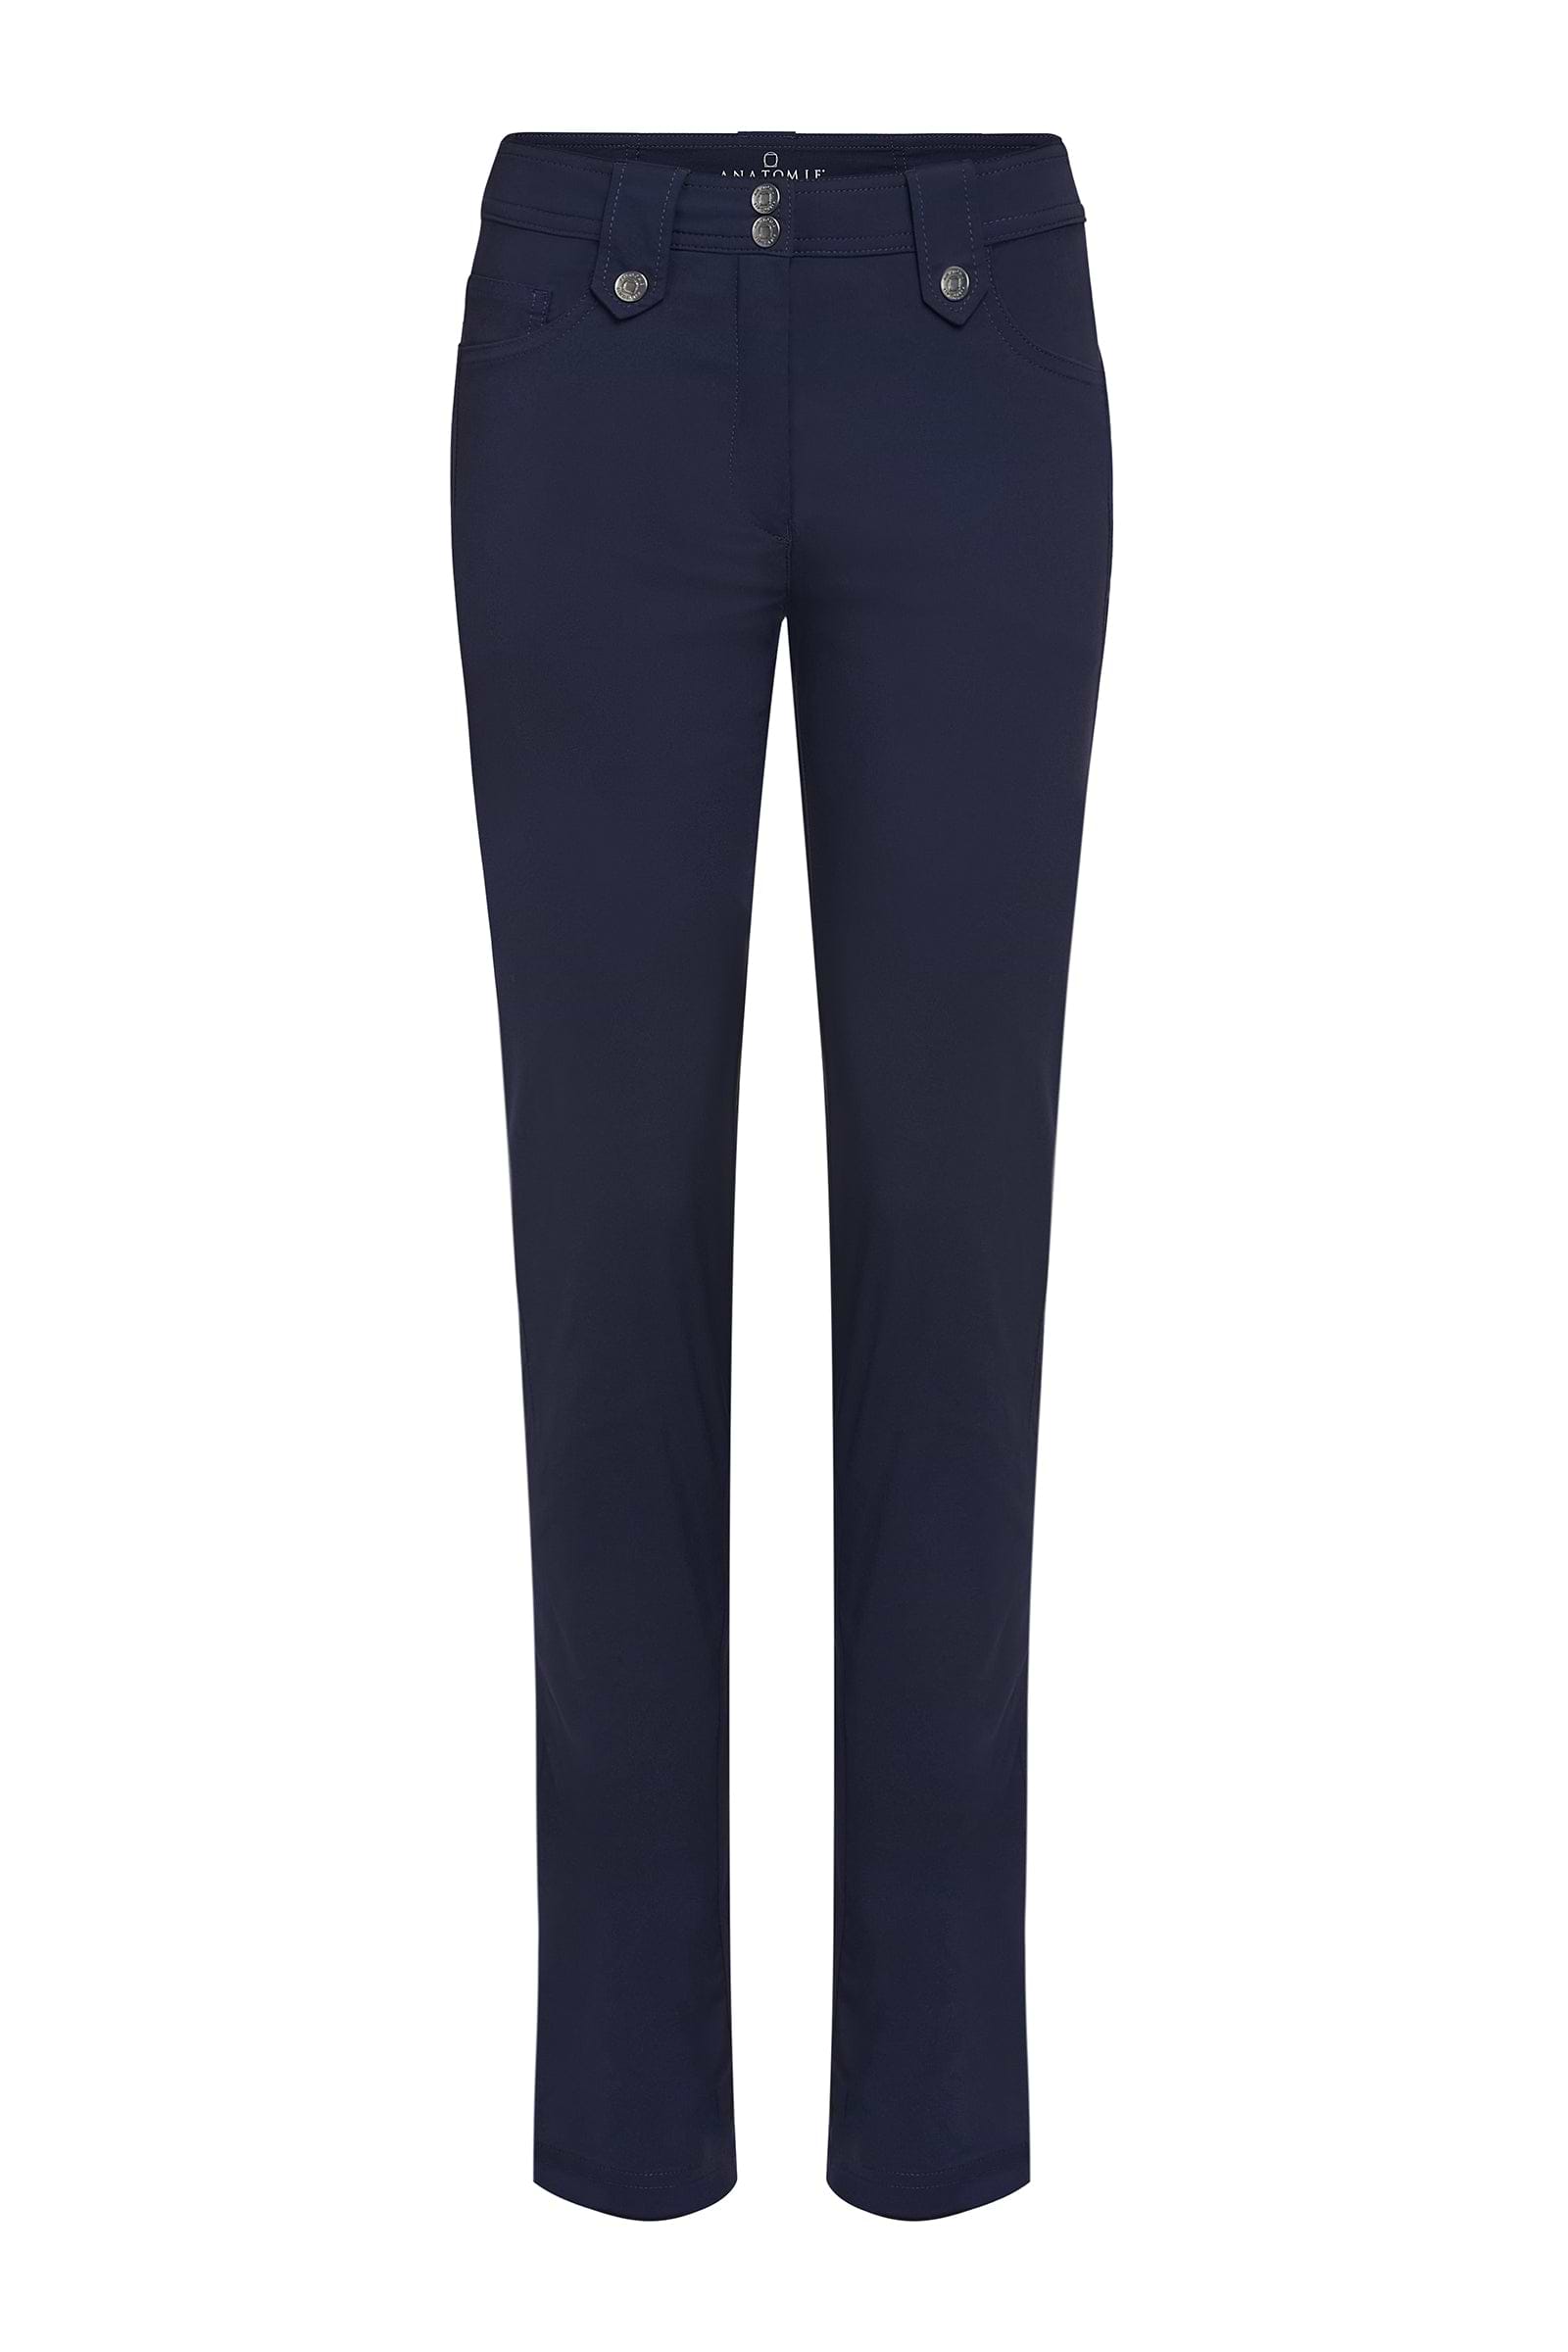 The Best Travel Pants. Flat Lay of the Skyler Travel Pant in Navy